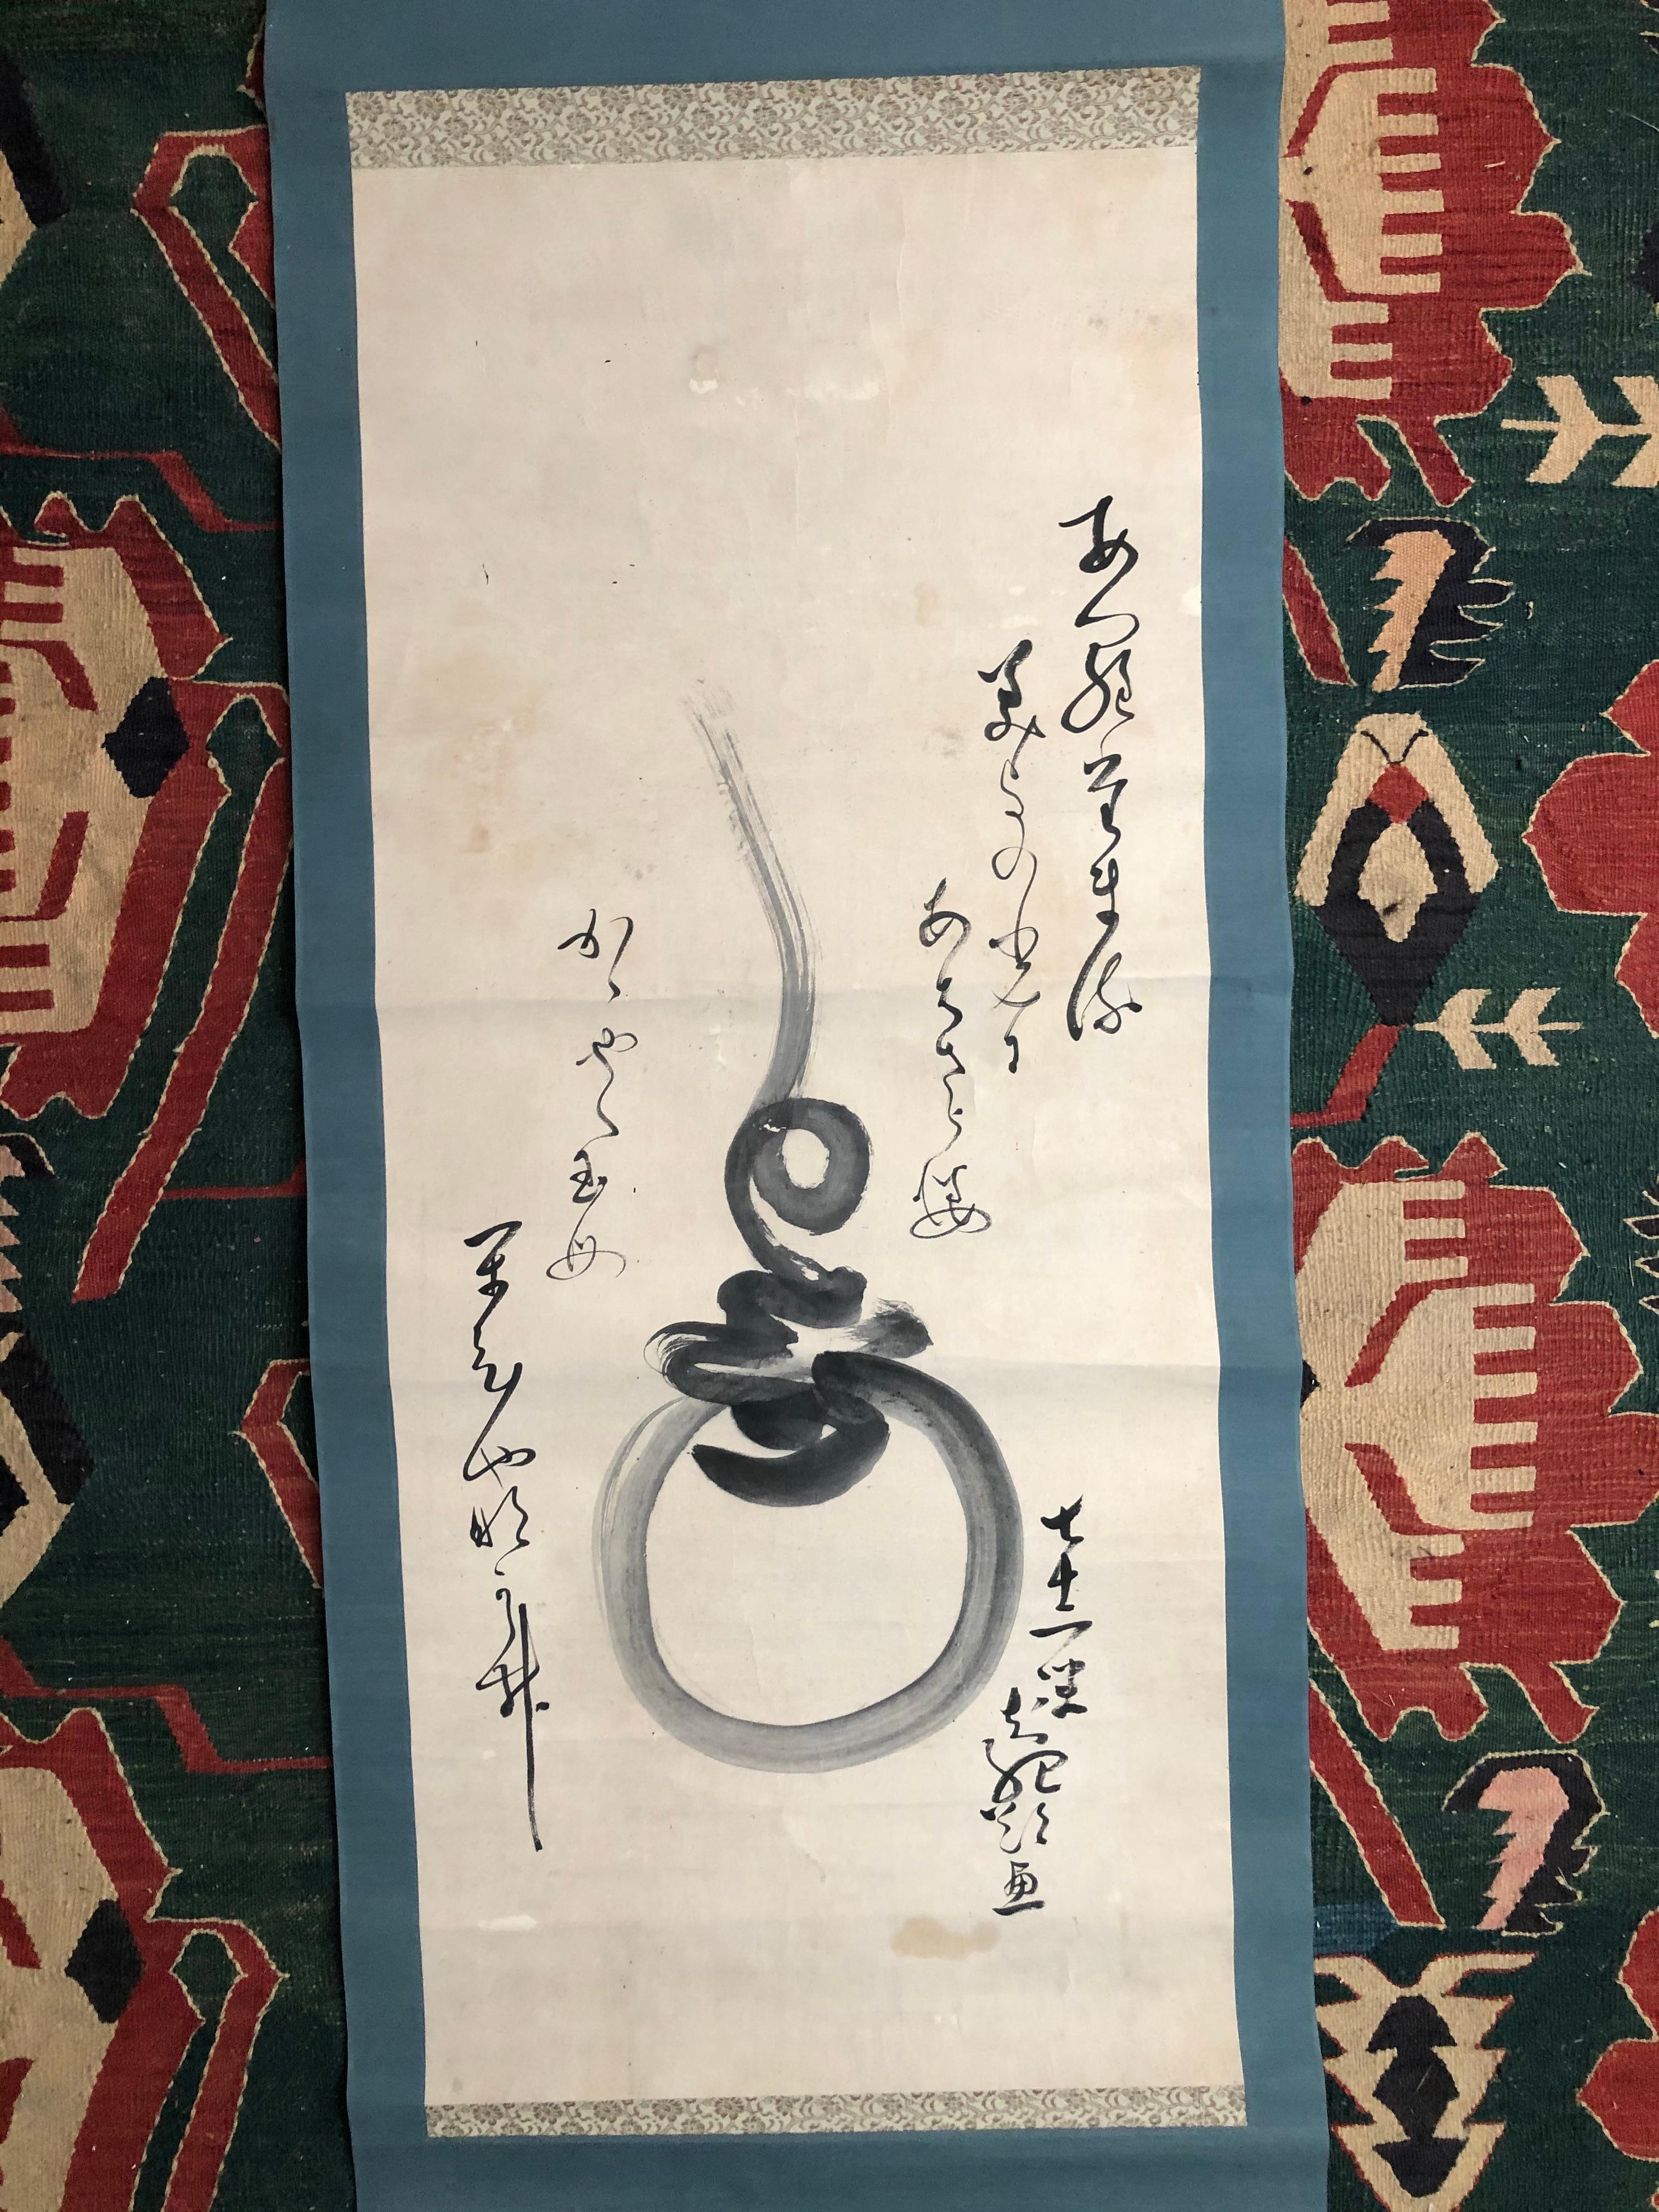 Japan, remarkable HoJu scroll, the wish granting jewel, signed, calligraphy painted on silk, wood rollers.

Dimensions: 26.5 inches wide and 72.5 inches length.

Includes an old wooden collector storage box tomobako.

Zen like but piqued